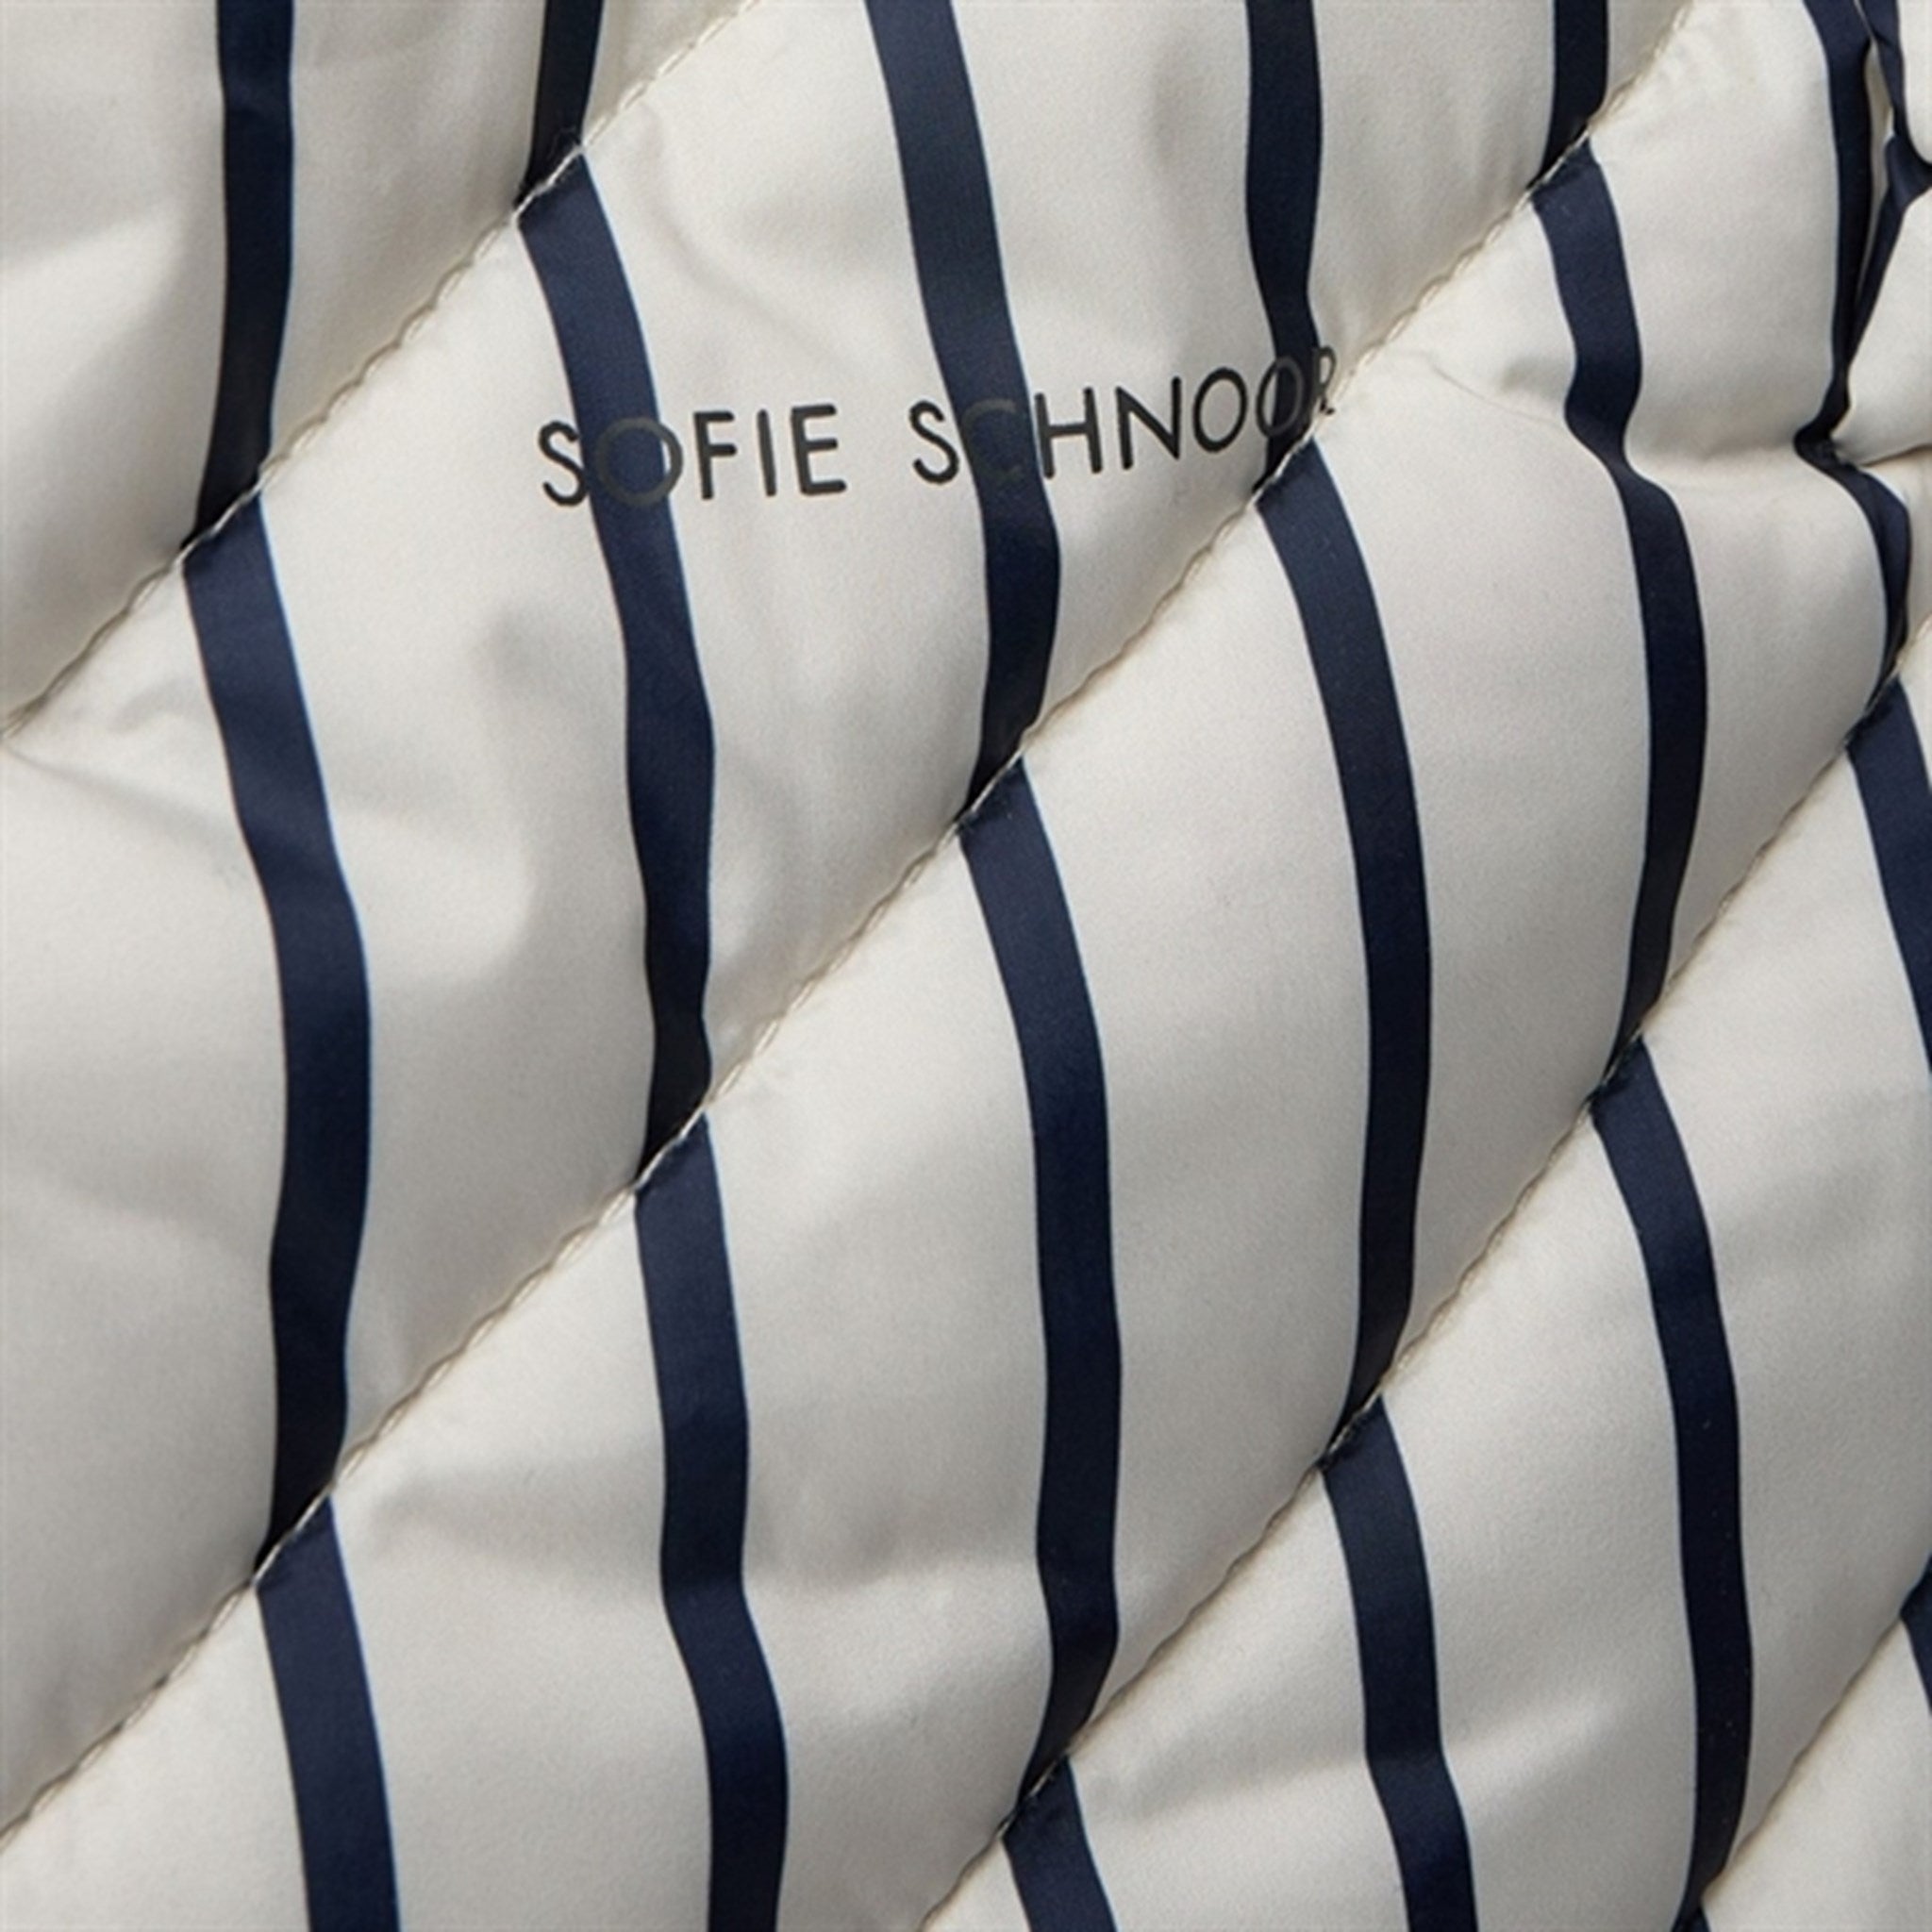 Sofie Schnoor Young Off White/ Navy Striped Totebag 2